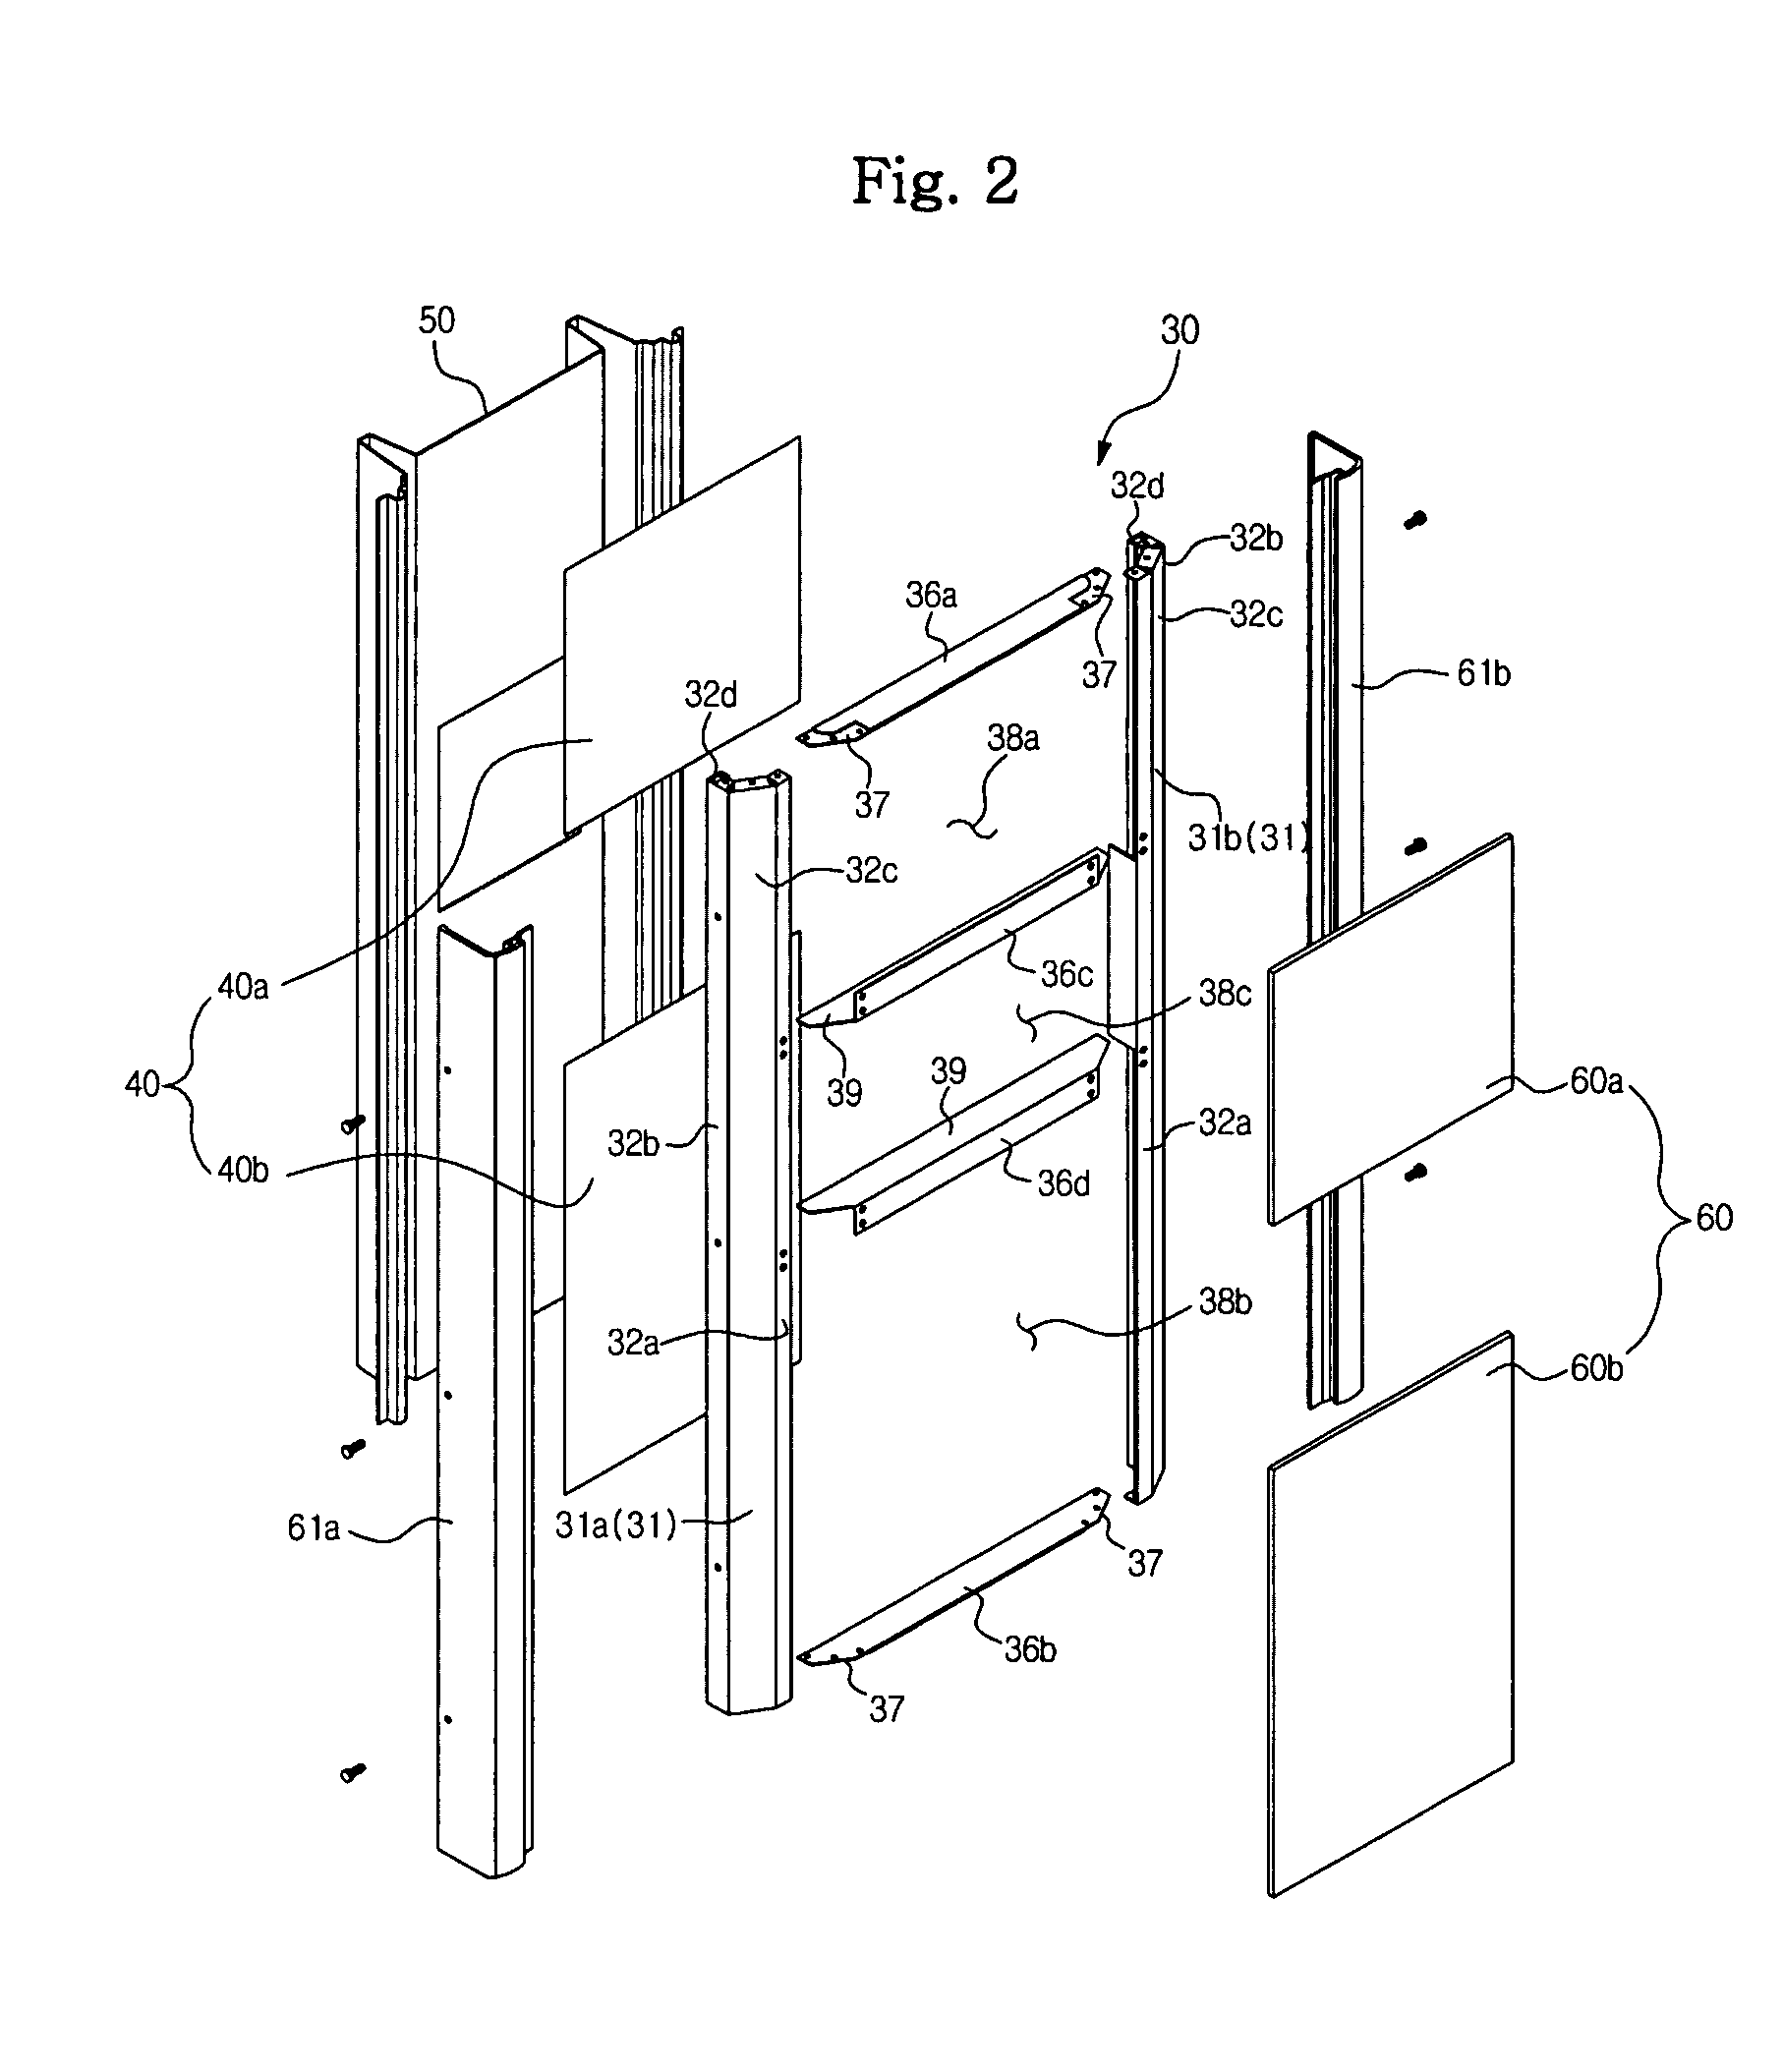 Refrigerator and method of manufacturing door thereof